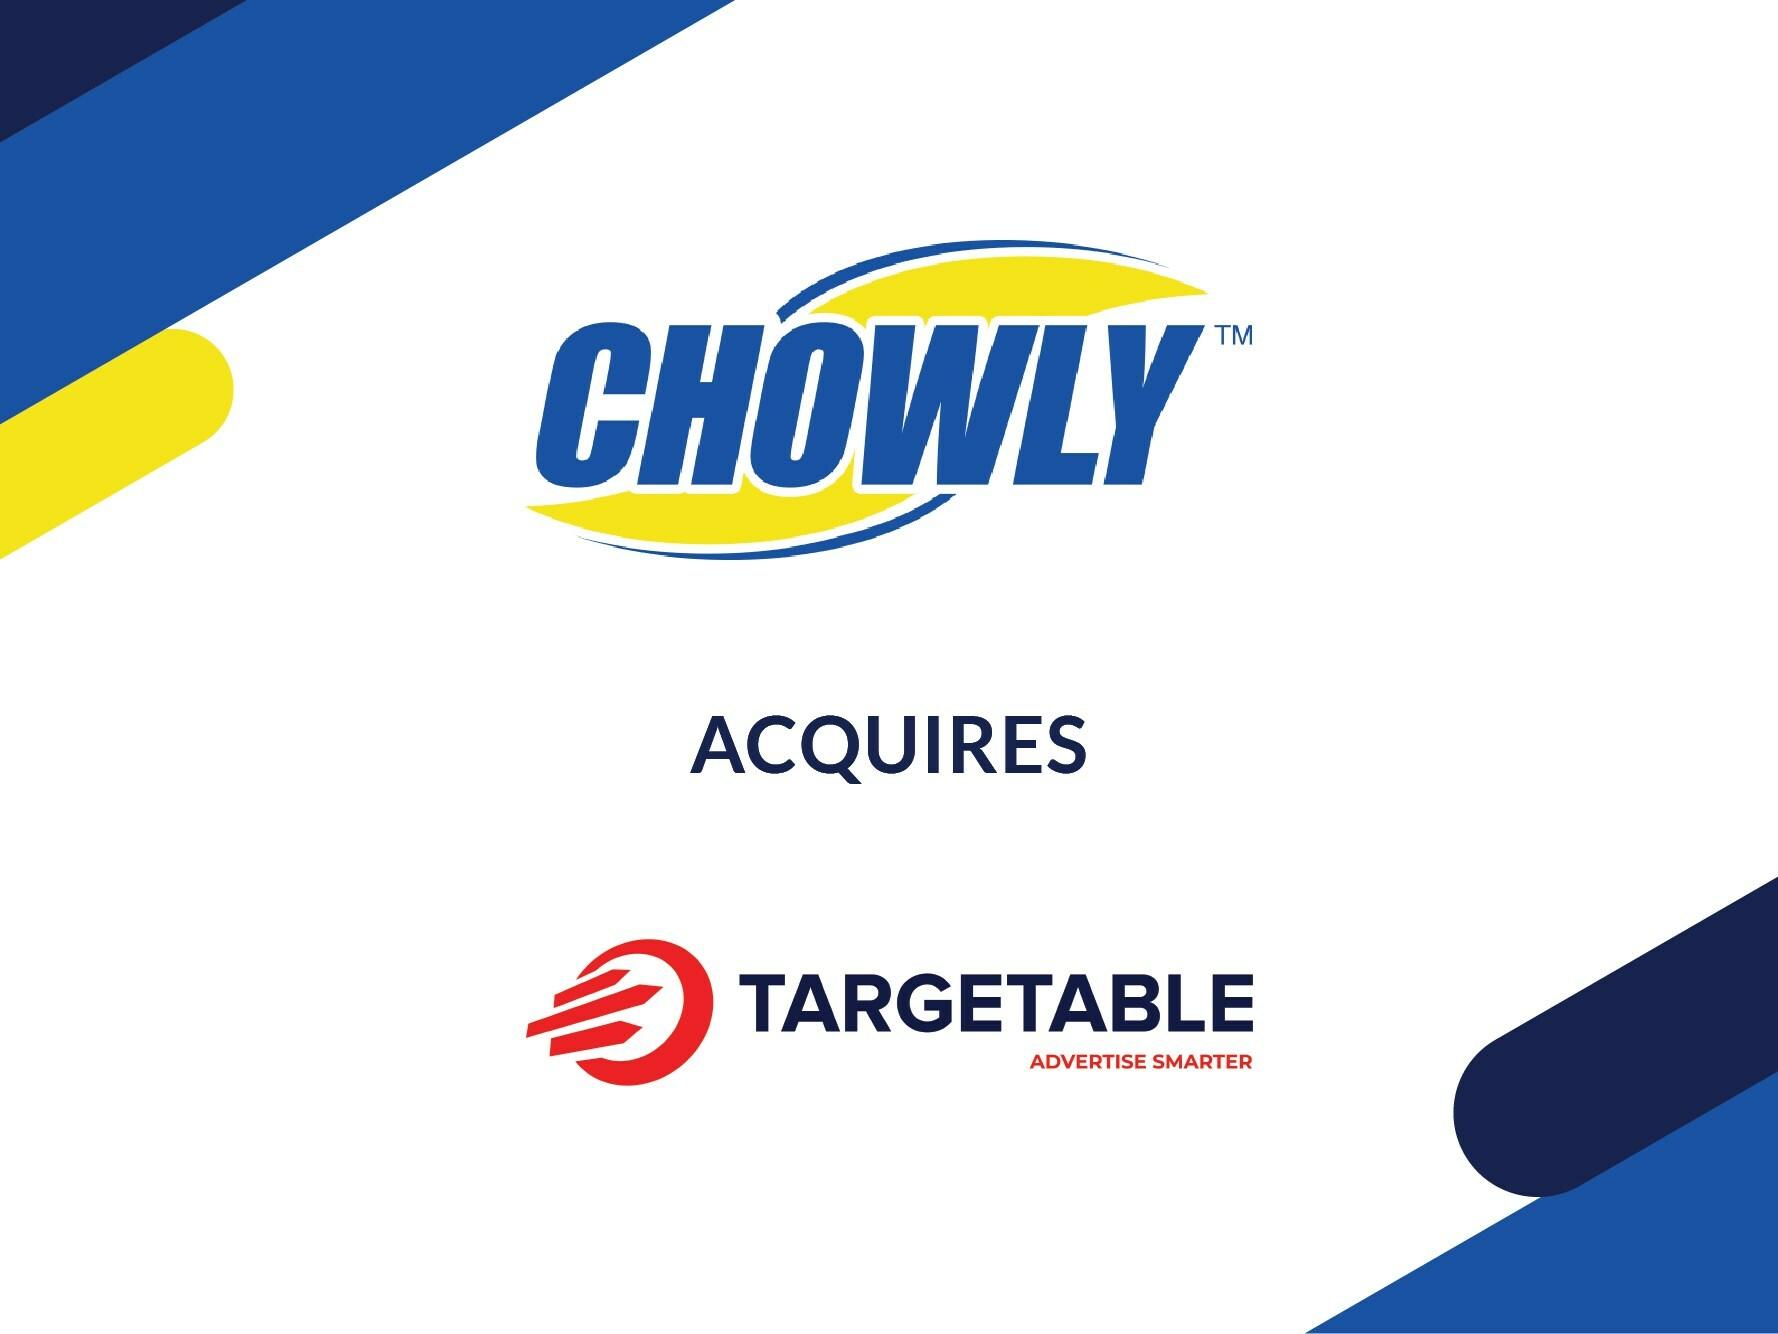 Chowly Announces Acquisition of Targetable to Help Increase Demand for Restaurants